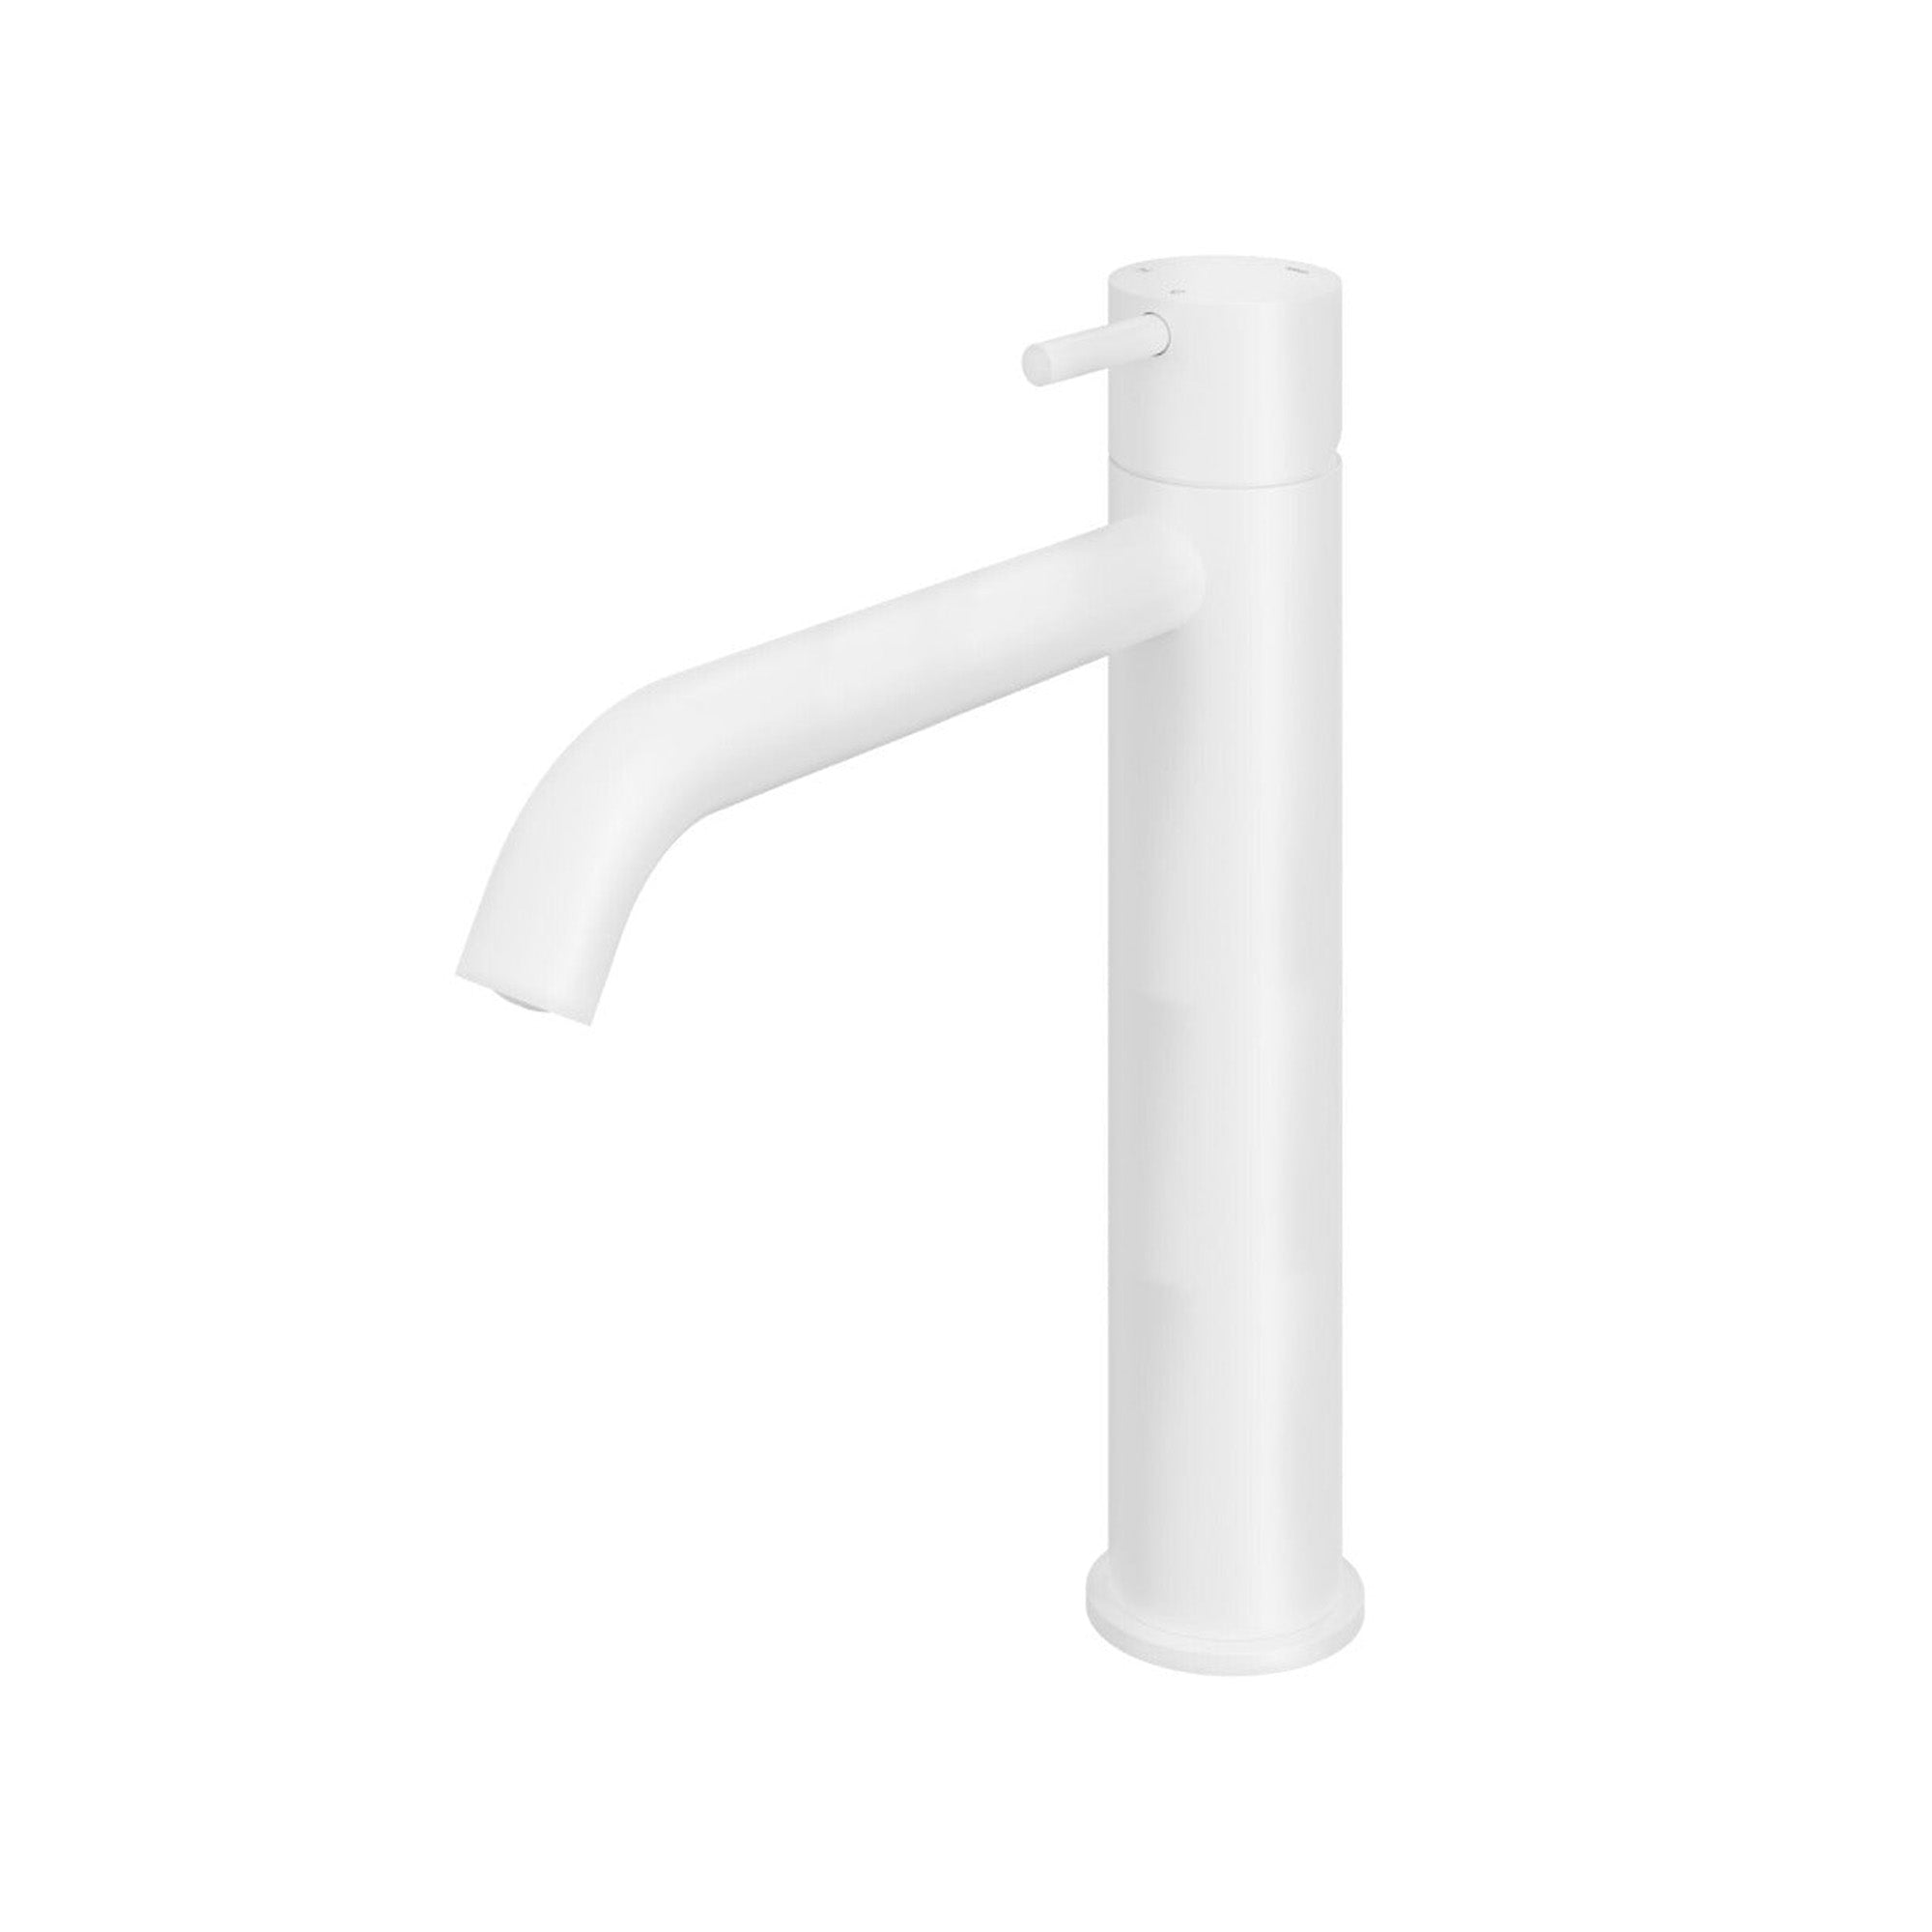 Cobber 286 Tall Basin Mixer Tap Curved Spout Monobloc